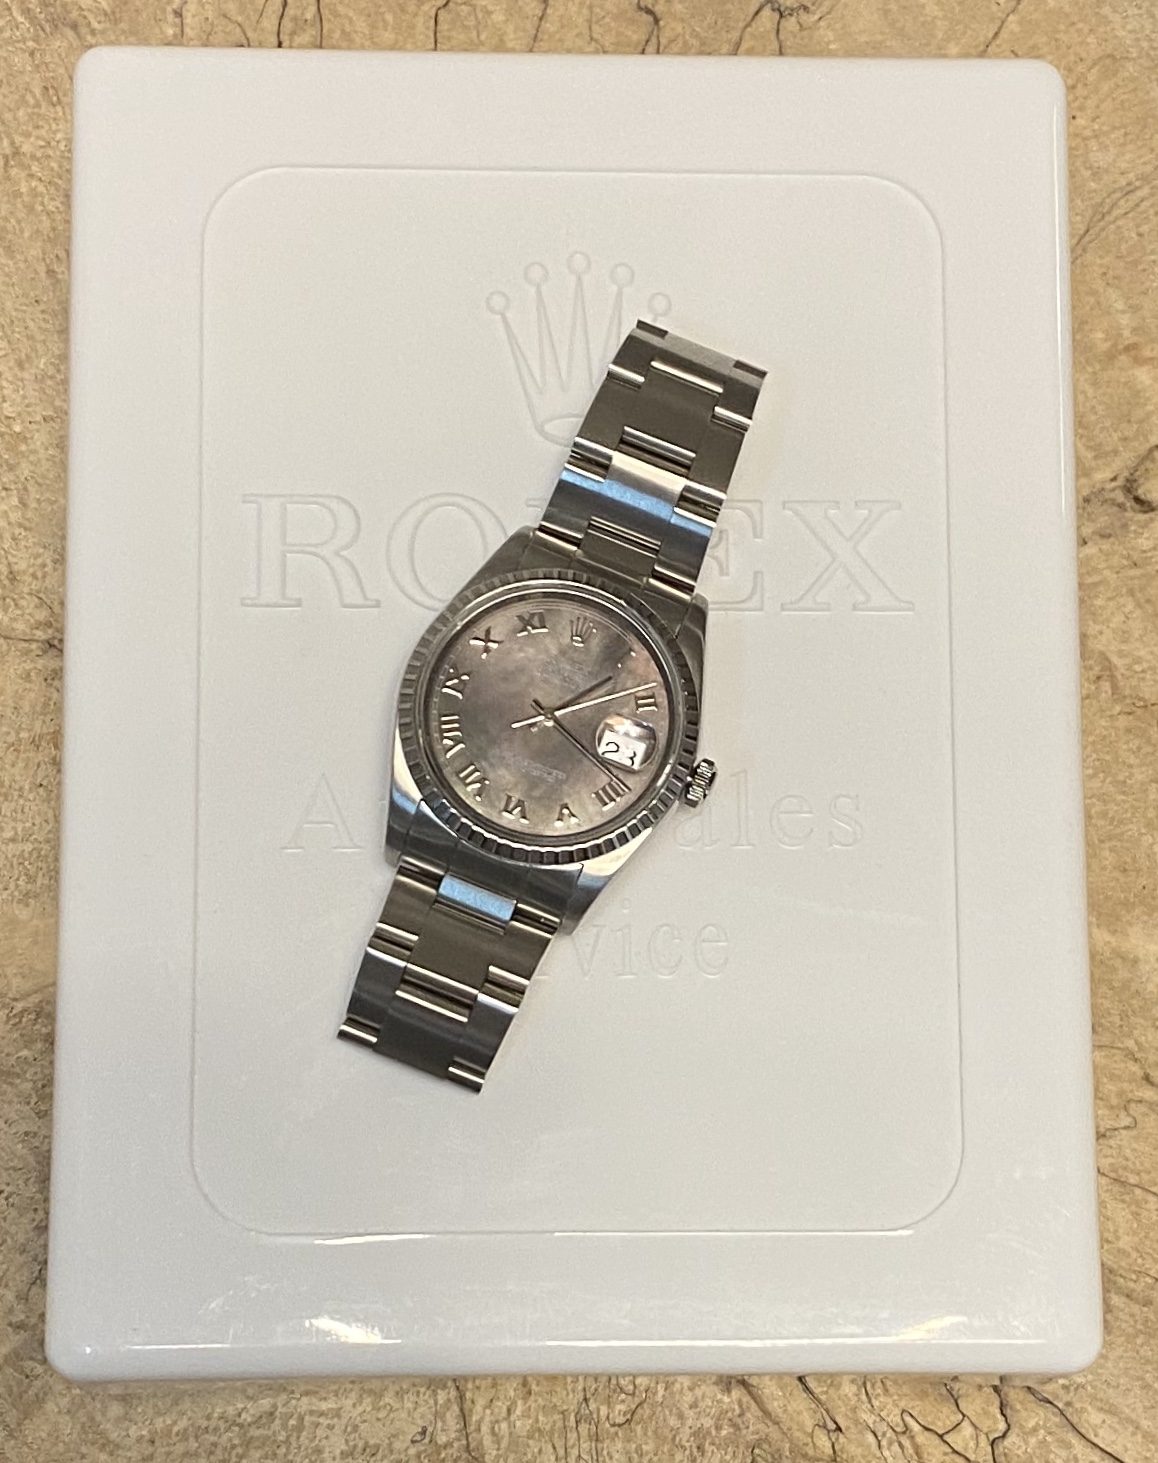 Gents Rolex Datejust 16220 Stainless Steel *2 Year Guarantee* (Hardly Worn From New) - Image 14 of 16